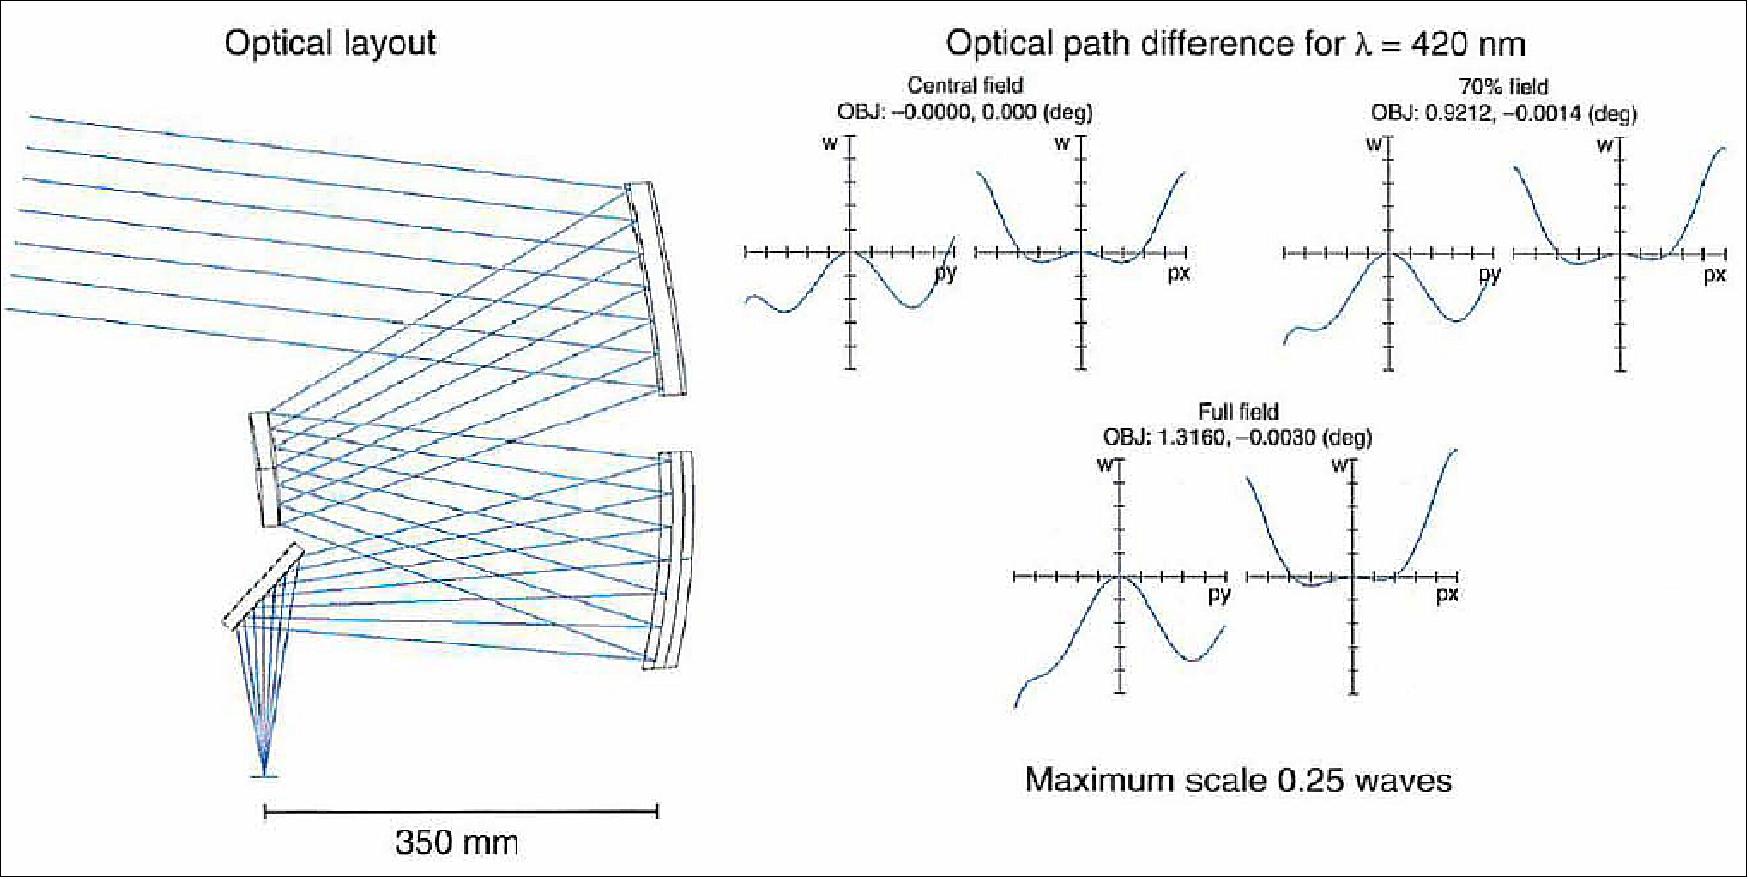 Figure 24: Optical layout of the three-mirror anastigmat telescope (left) with a focal length of 522 mm. Tue optical path difference is less than a quarter wave for a wavelength of 420 nm (right), denoting diffraction-limited performance (image credit: OHB)